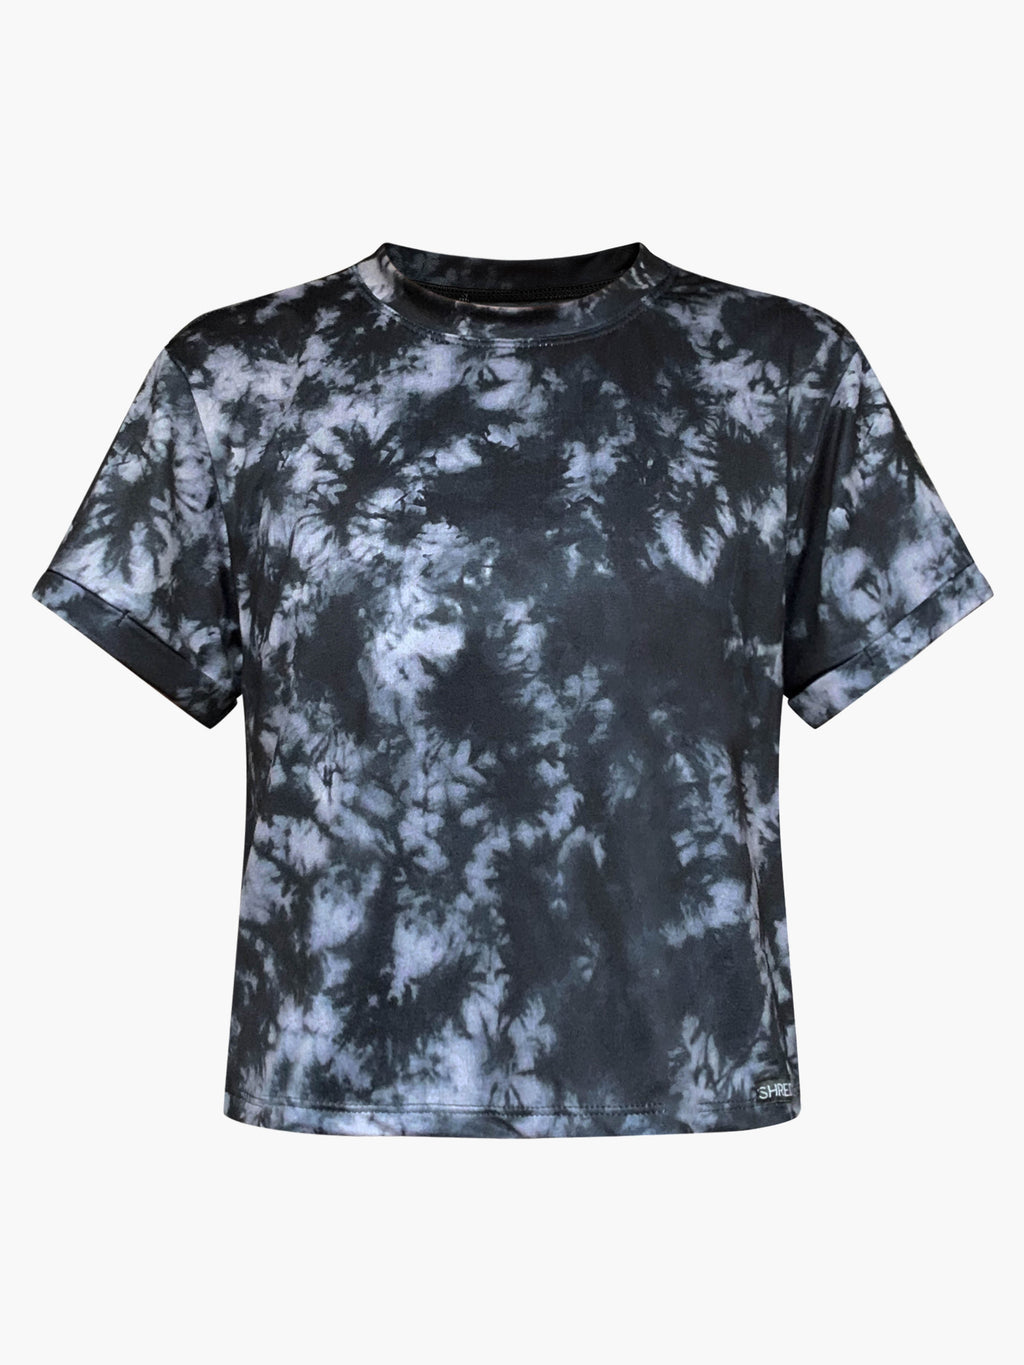 SHREDLY - Cropped Mesh Tee : Graphite Tie Dye - image